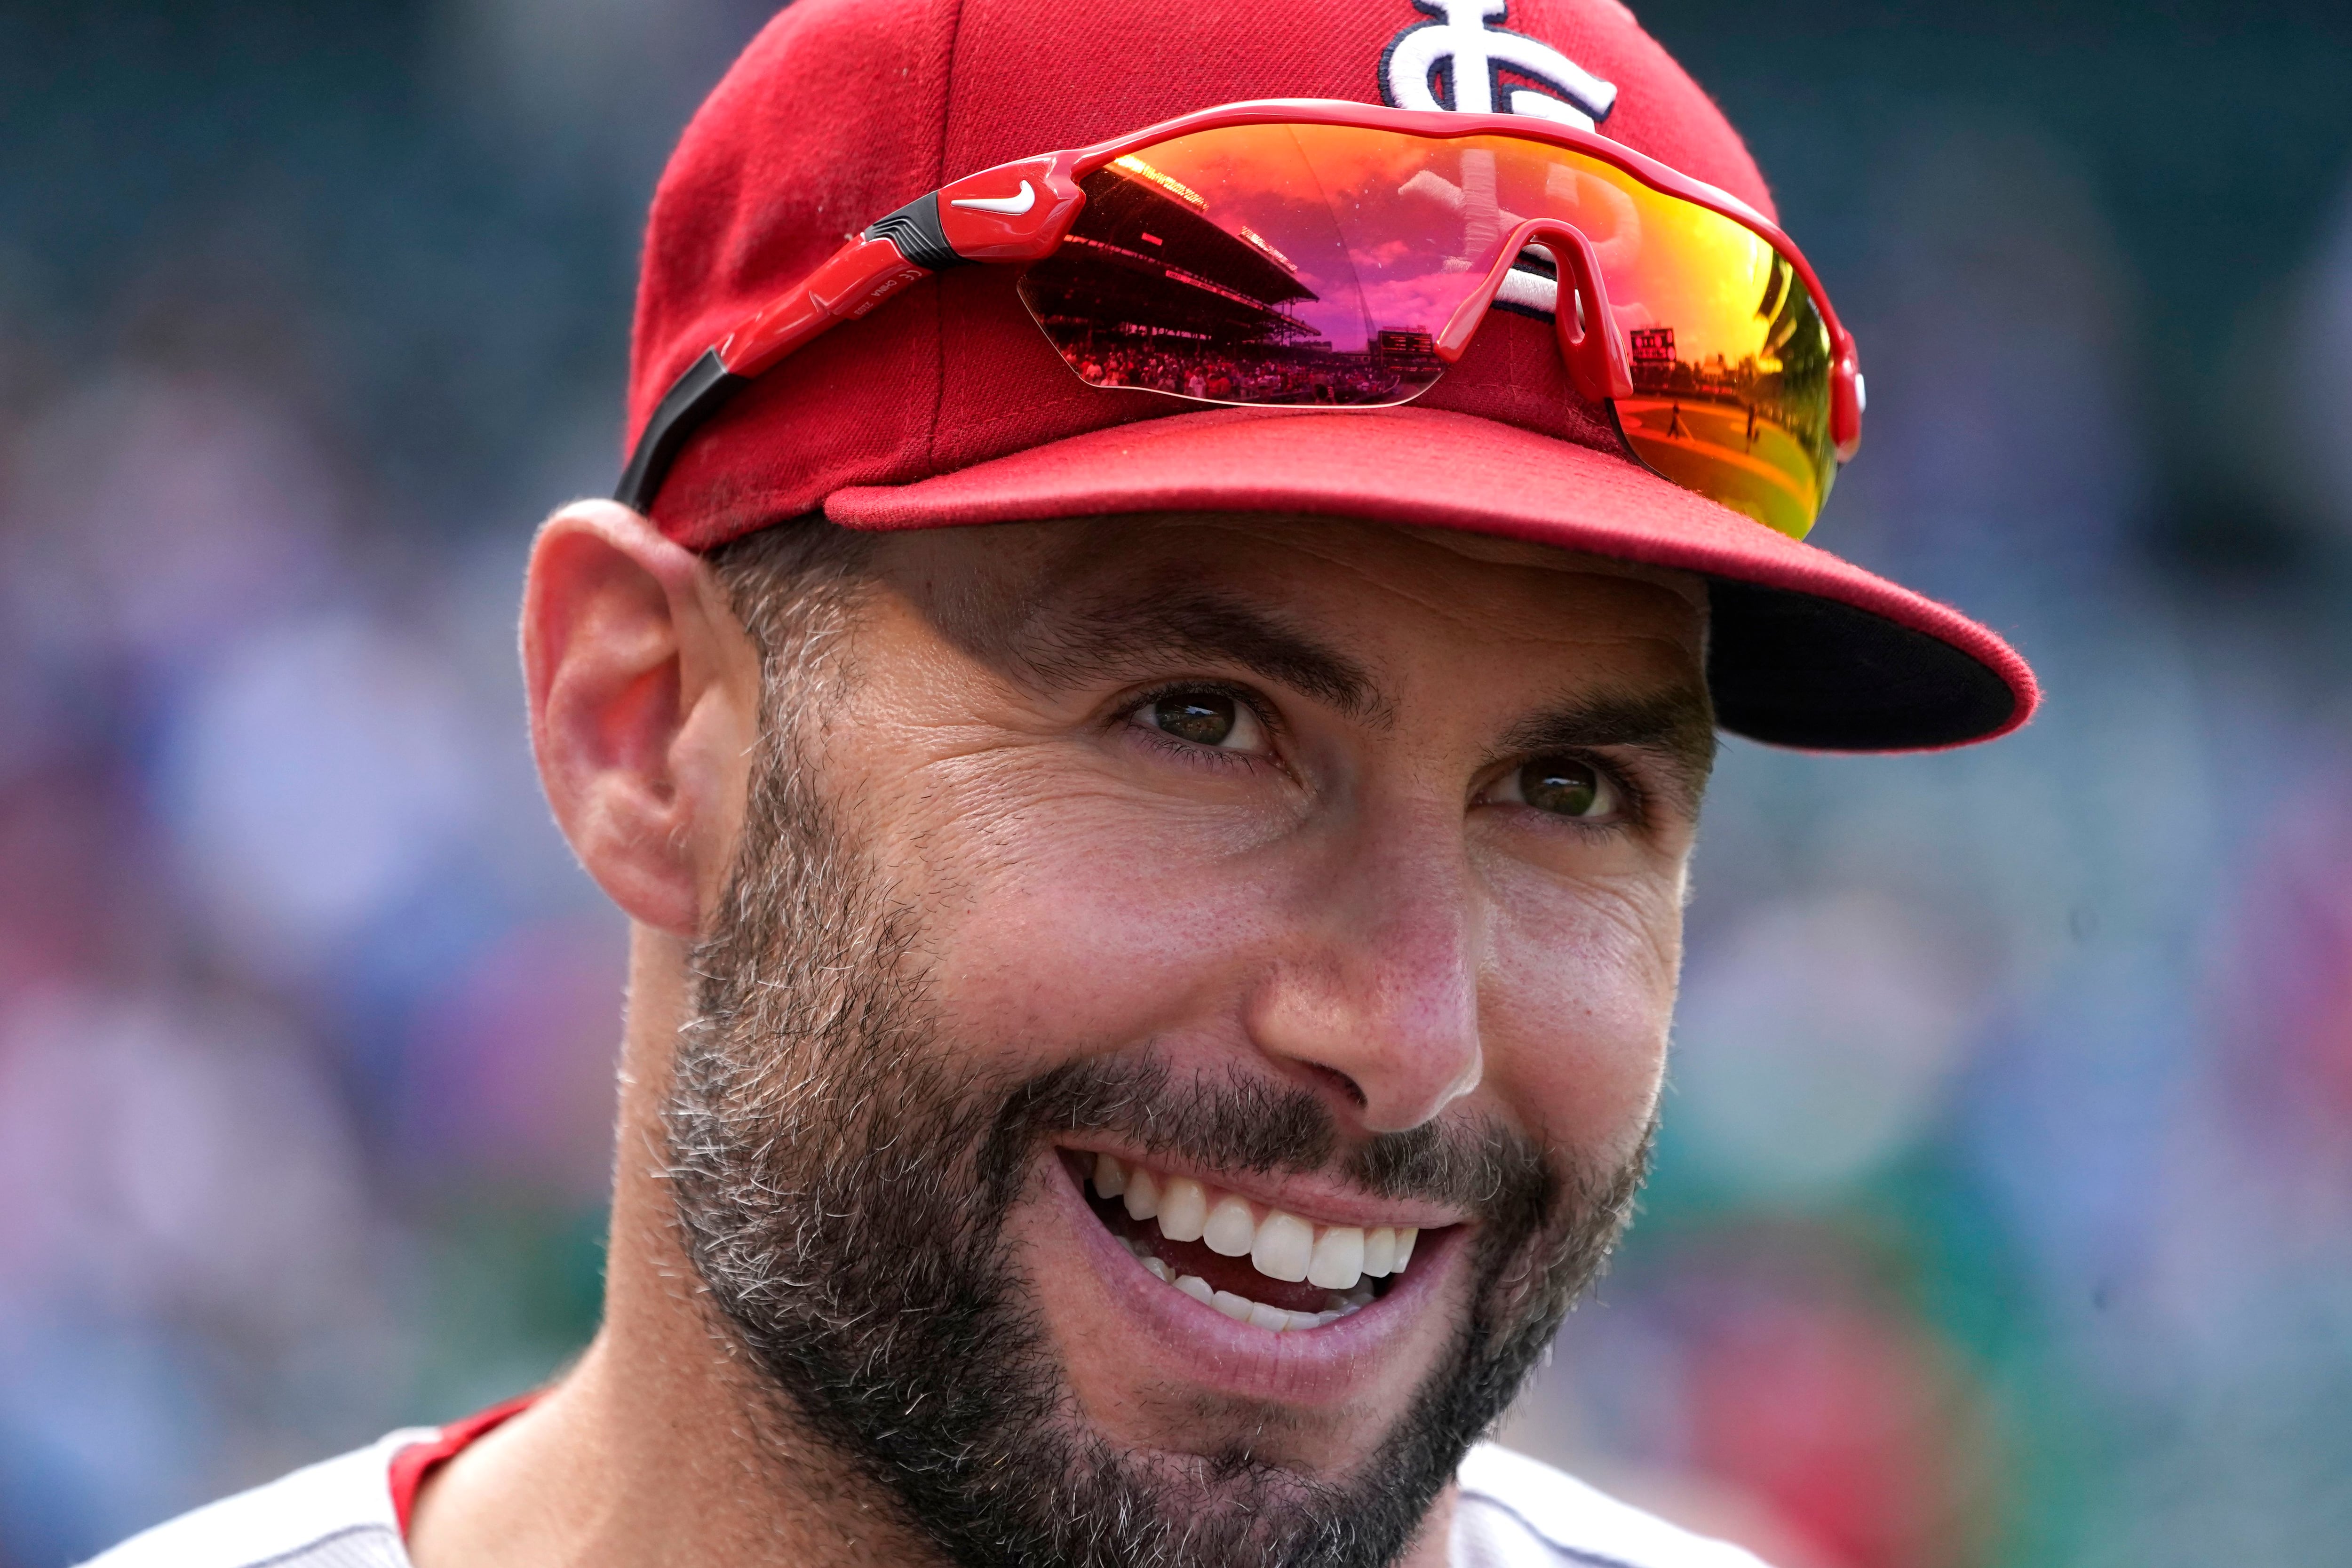 Kim in command: Cardinals lefty throws six scoreless, combines with  Goldschmidt to clobber Cubs, 6-0